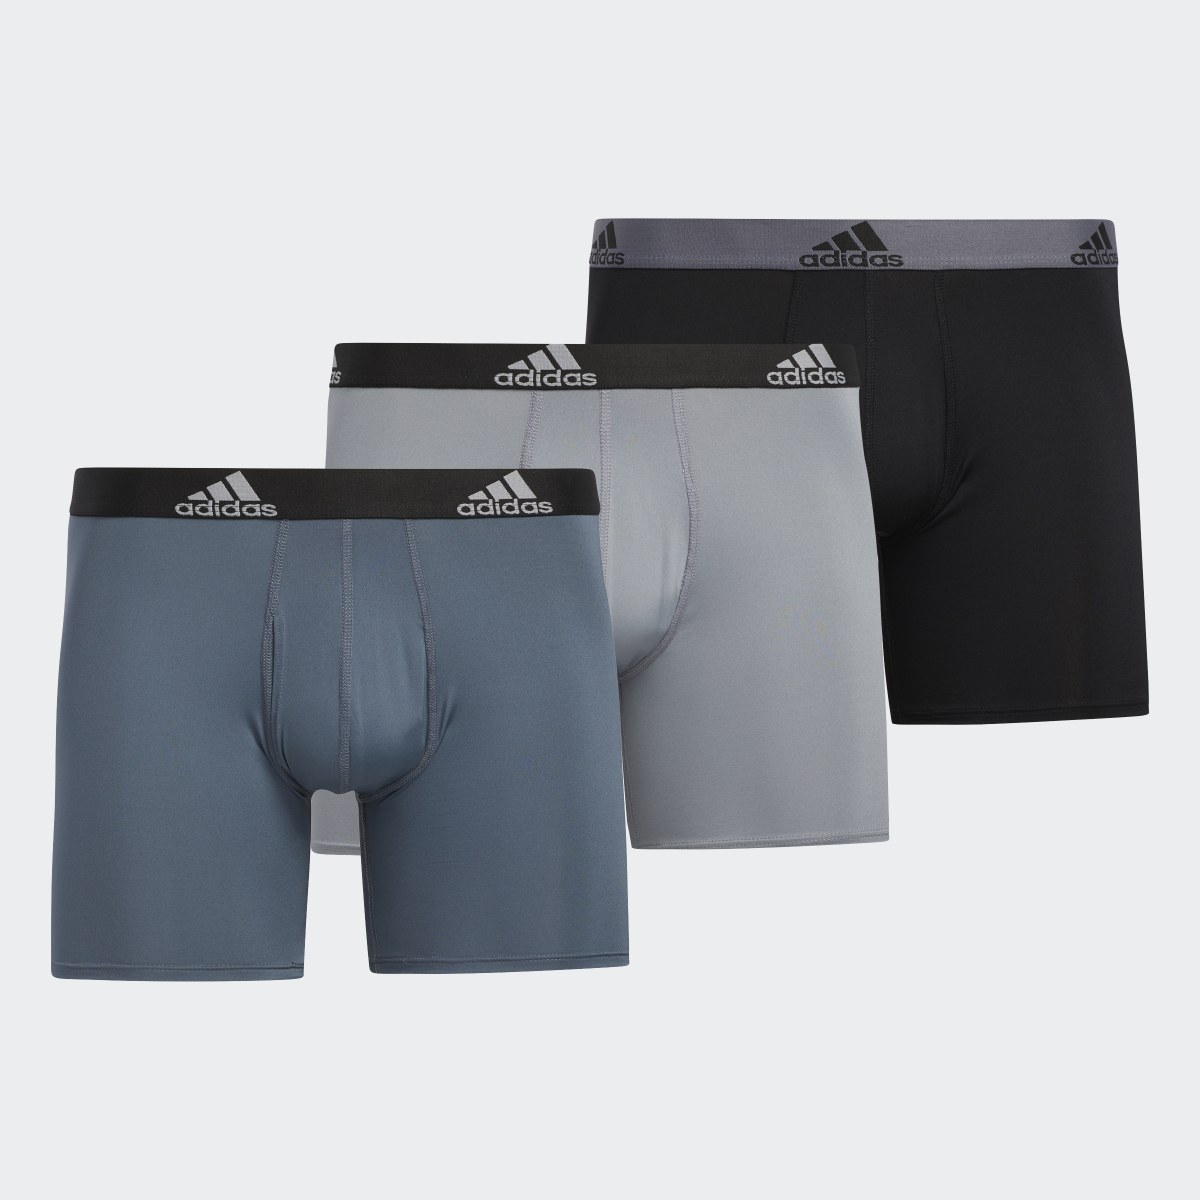 Adidas Performance Boxers Three-Pack (Big and Tall). 4